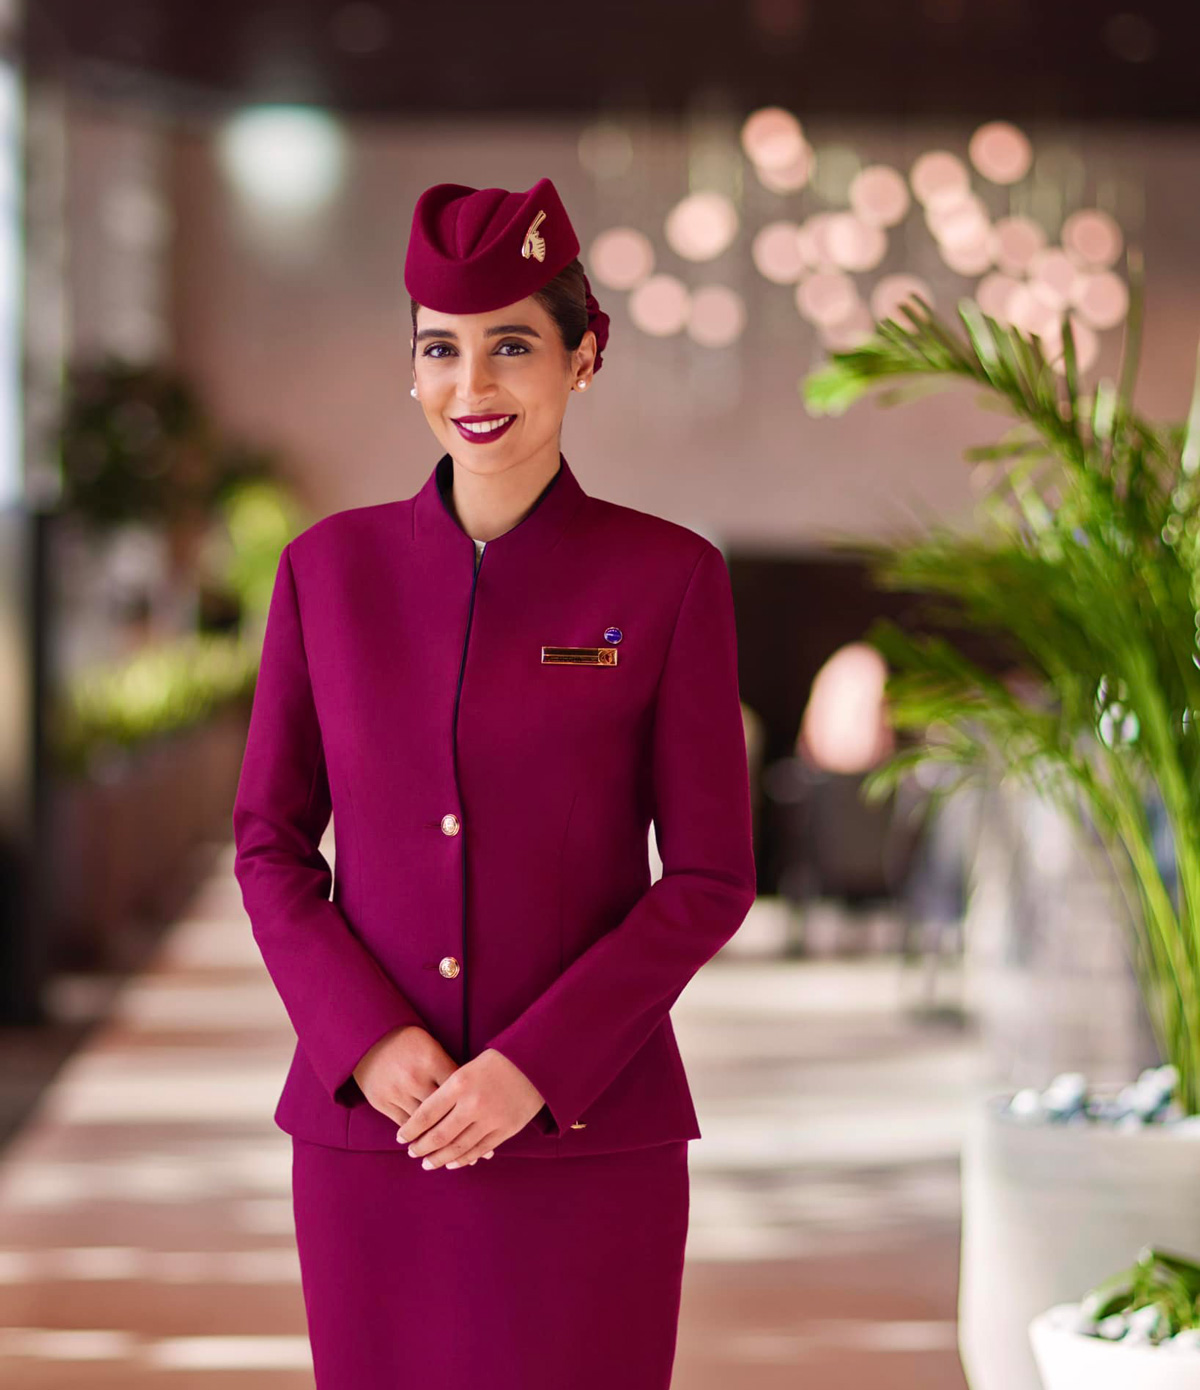 Launch your Cabin Crew career with a world-leading Airline: Qatar is hiring